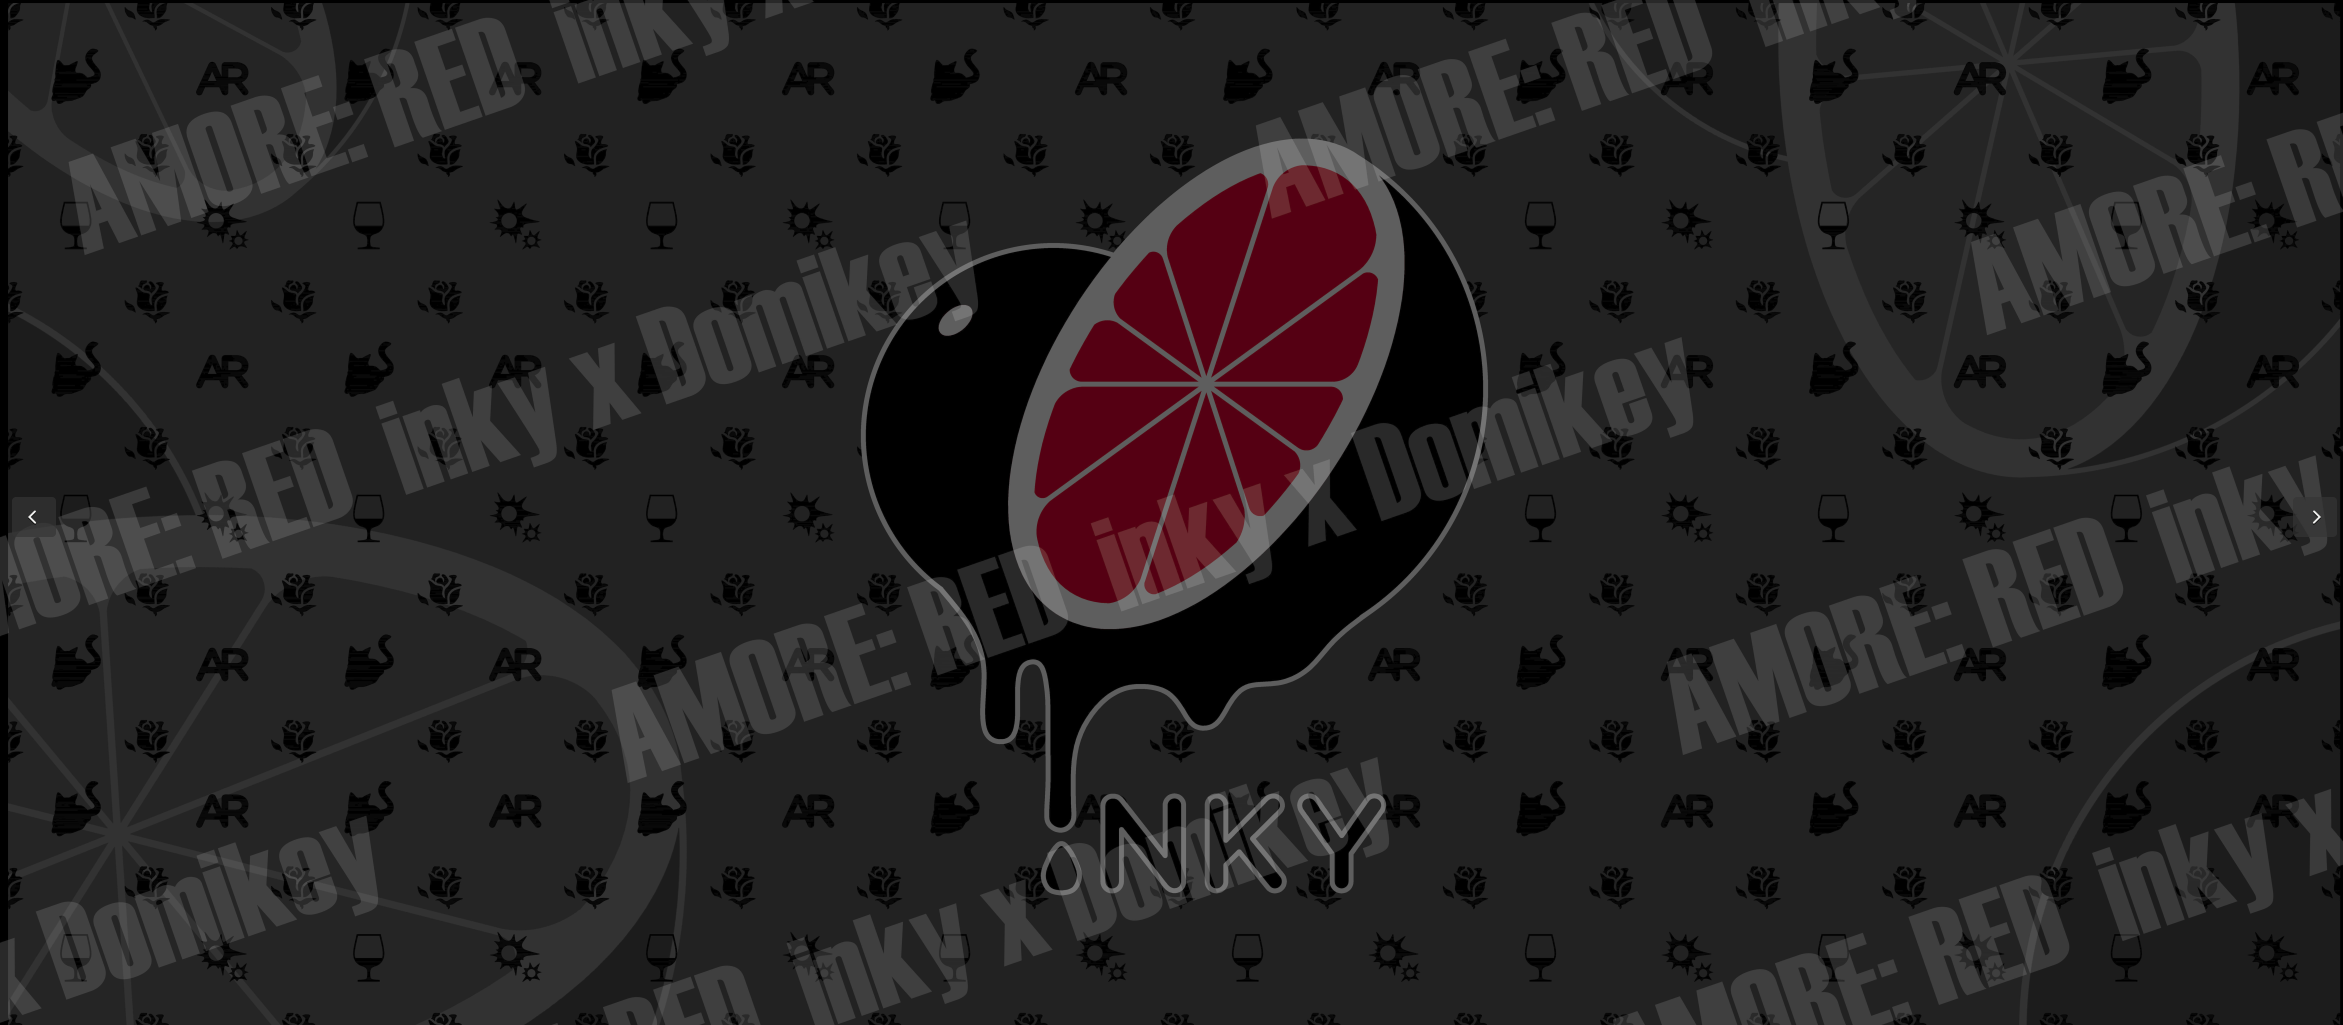 [GROUP BUY] Domikey x iNKY Amore Cherry Profile Keycaps